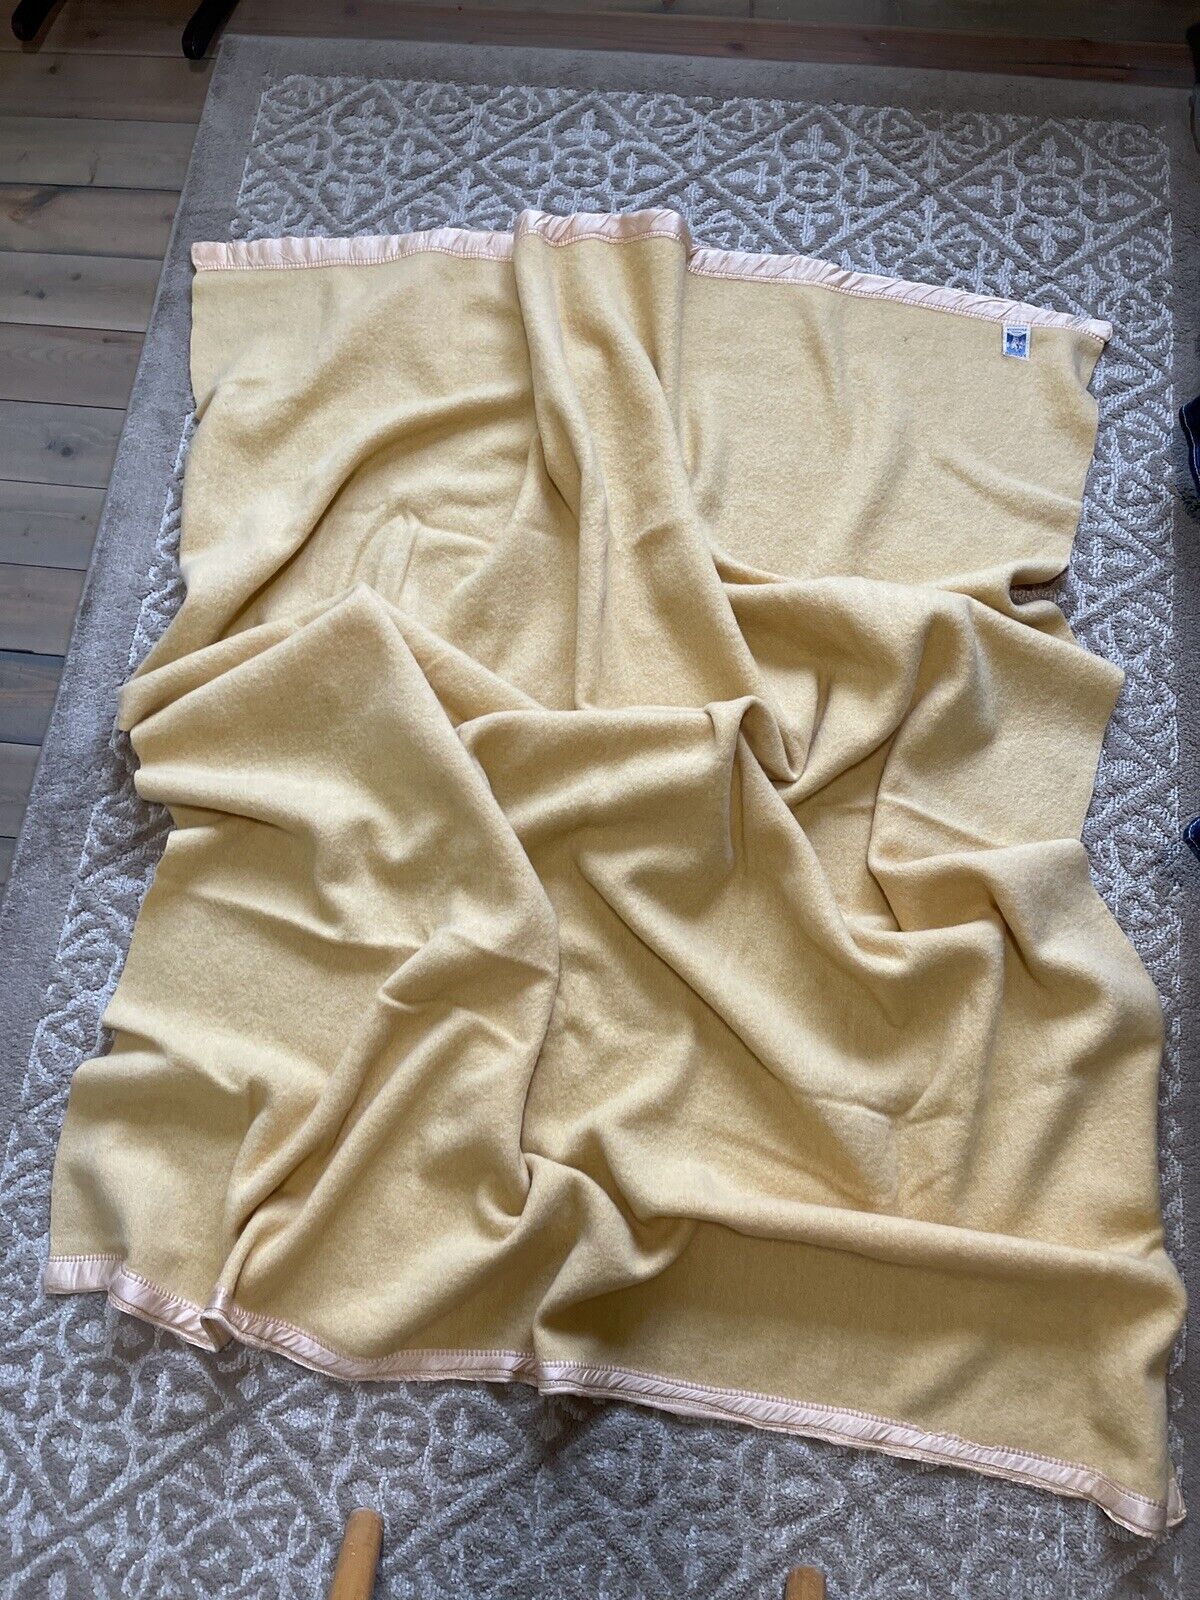 VTG Kenwood Arondac Wool Products Blanket Satin Edge Golden Yellow 79” by 67”